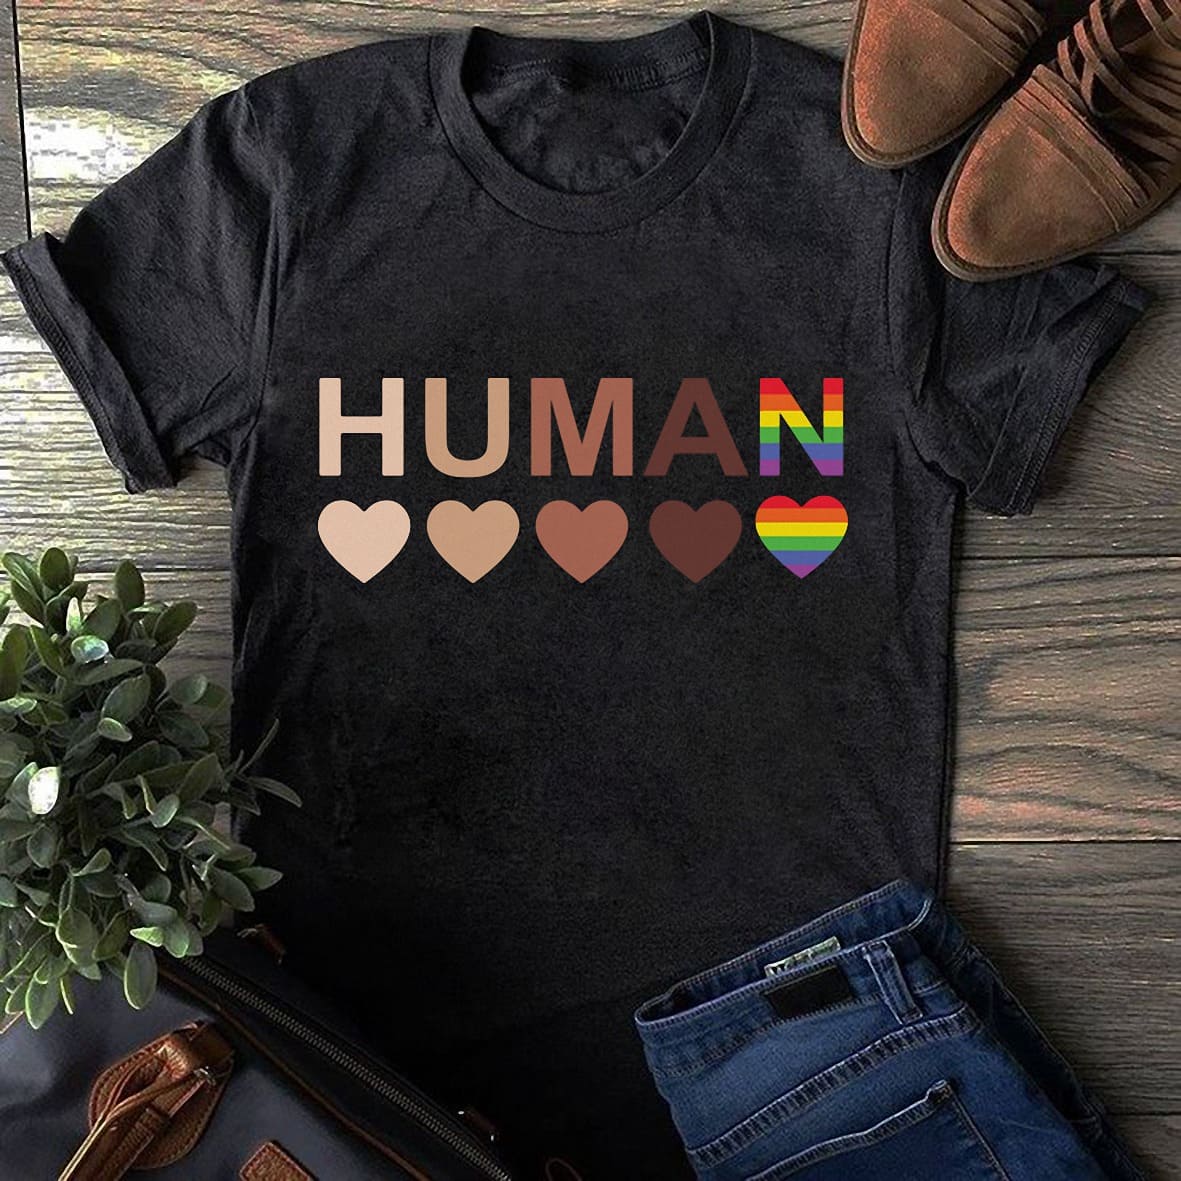 Human and equality - Equality for everyone, black and lgbt community